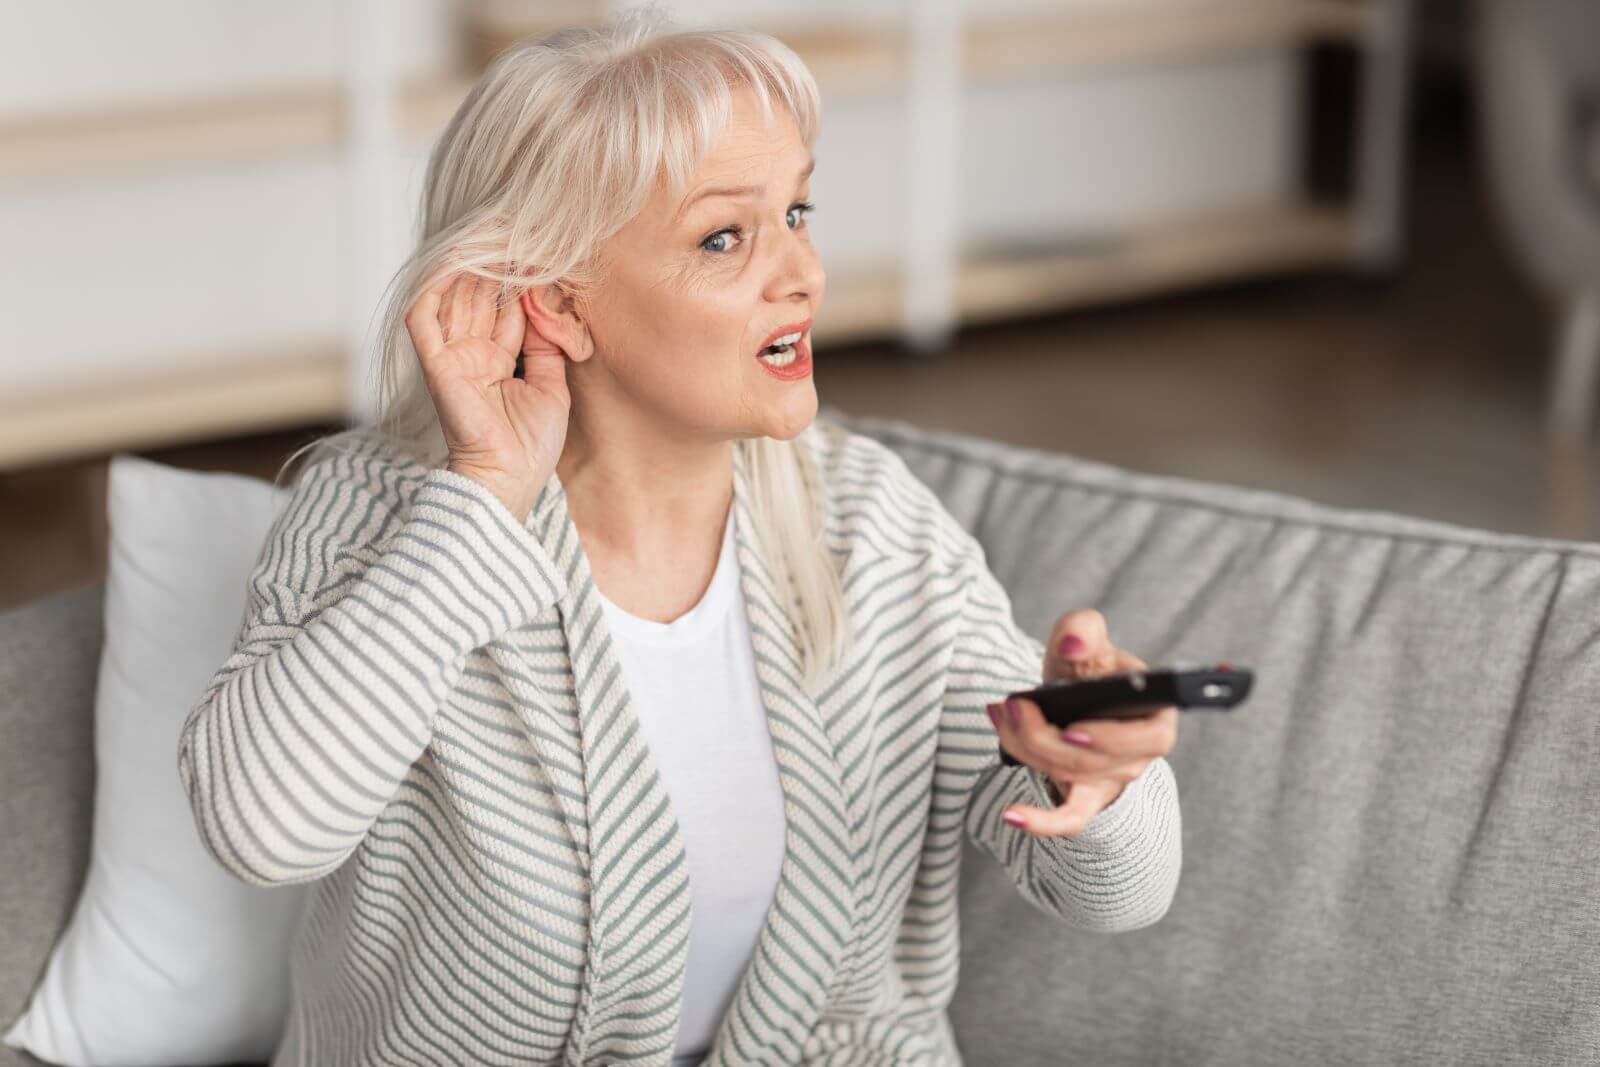 Featured image for “Watching TV with Hearing Aids”